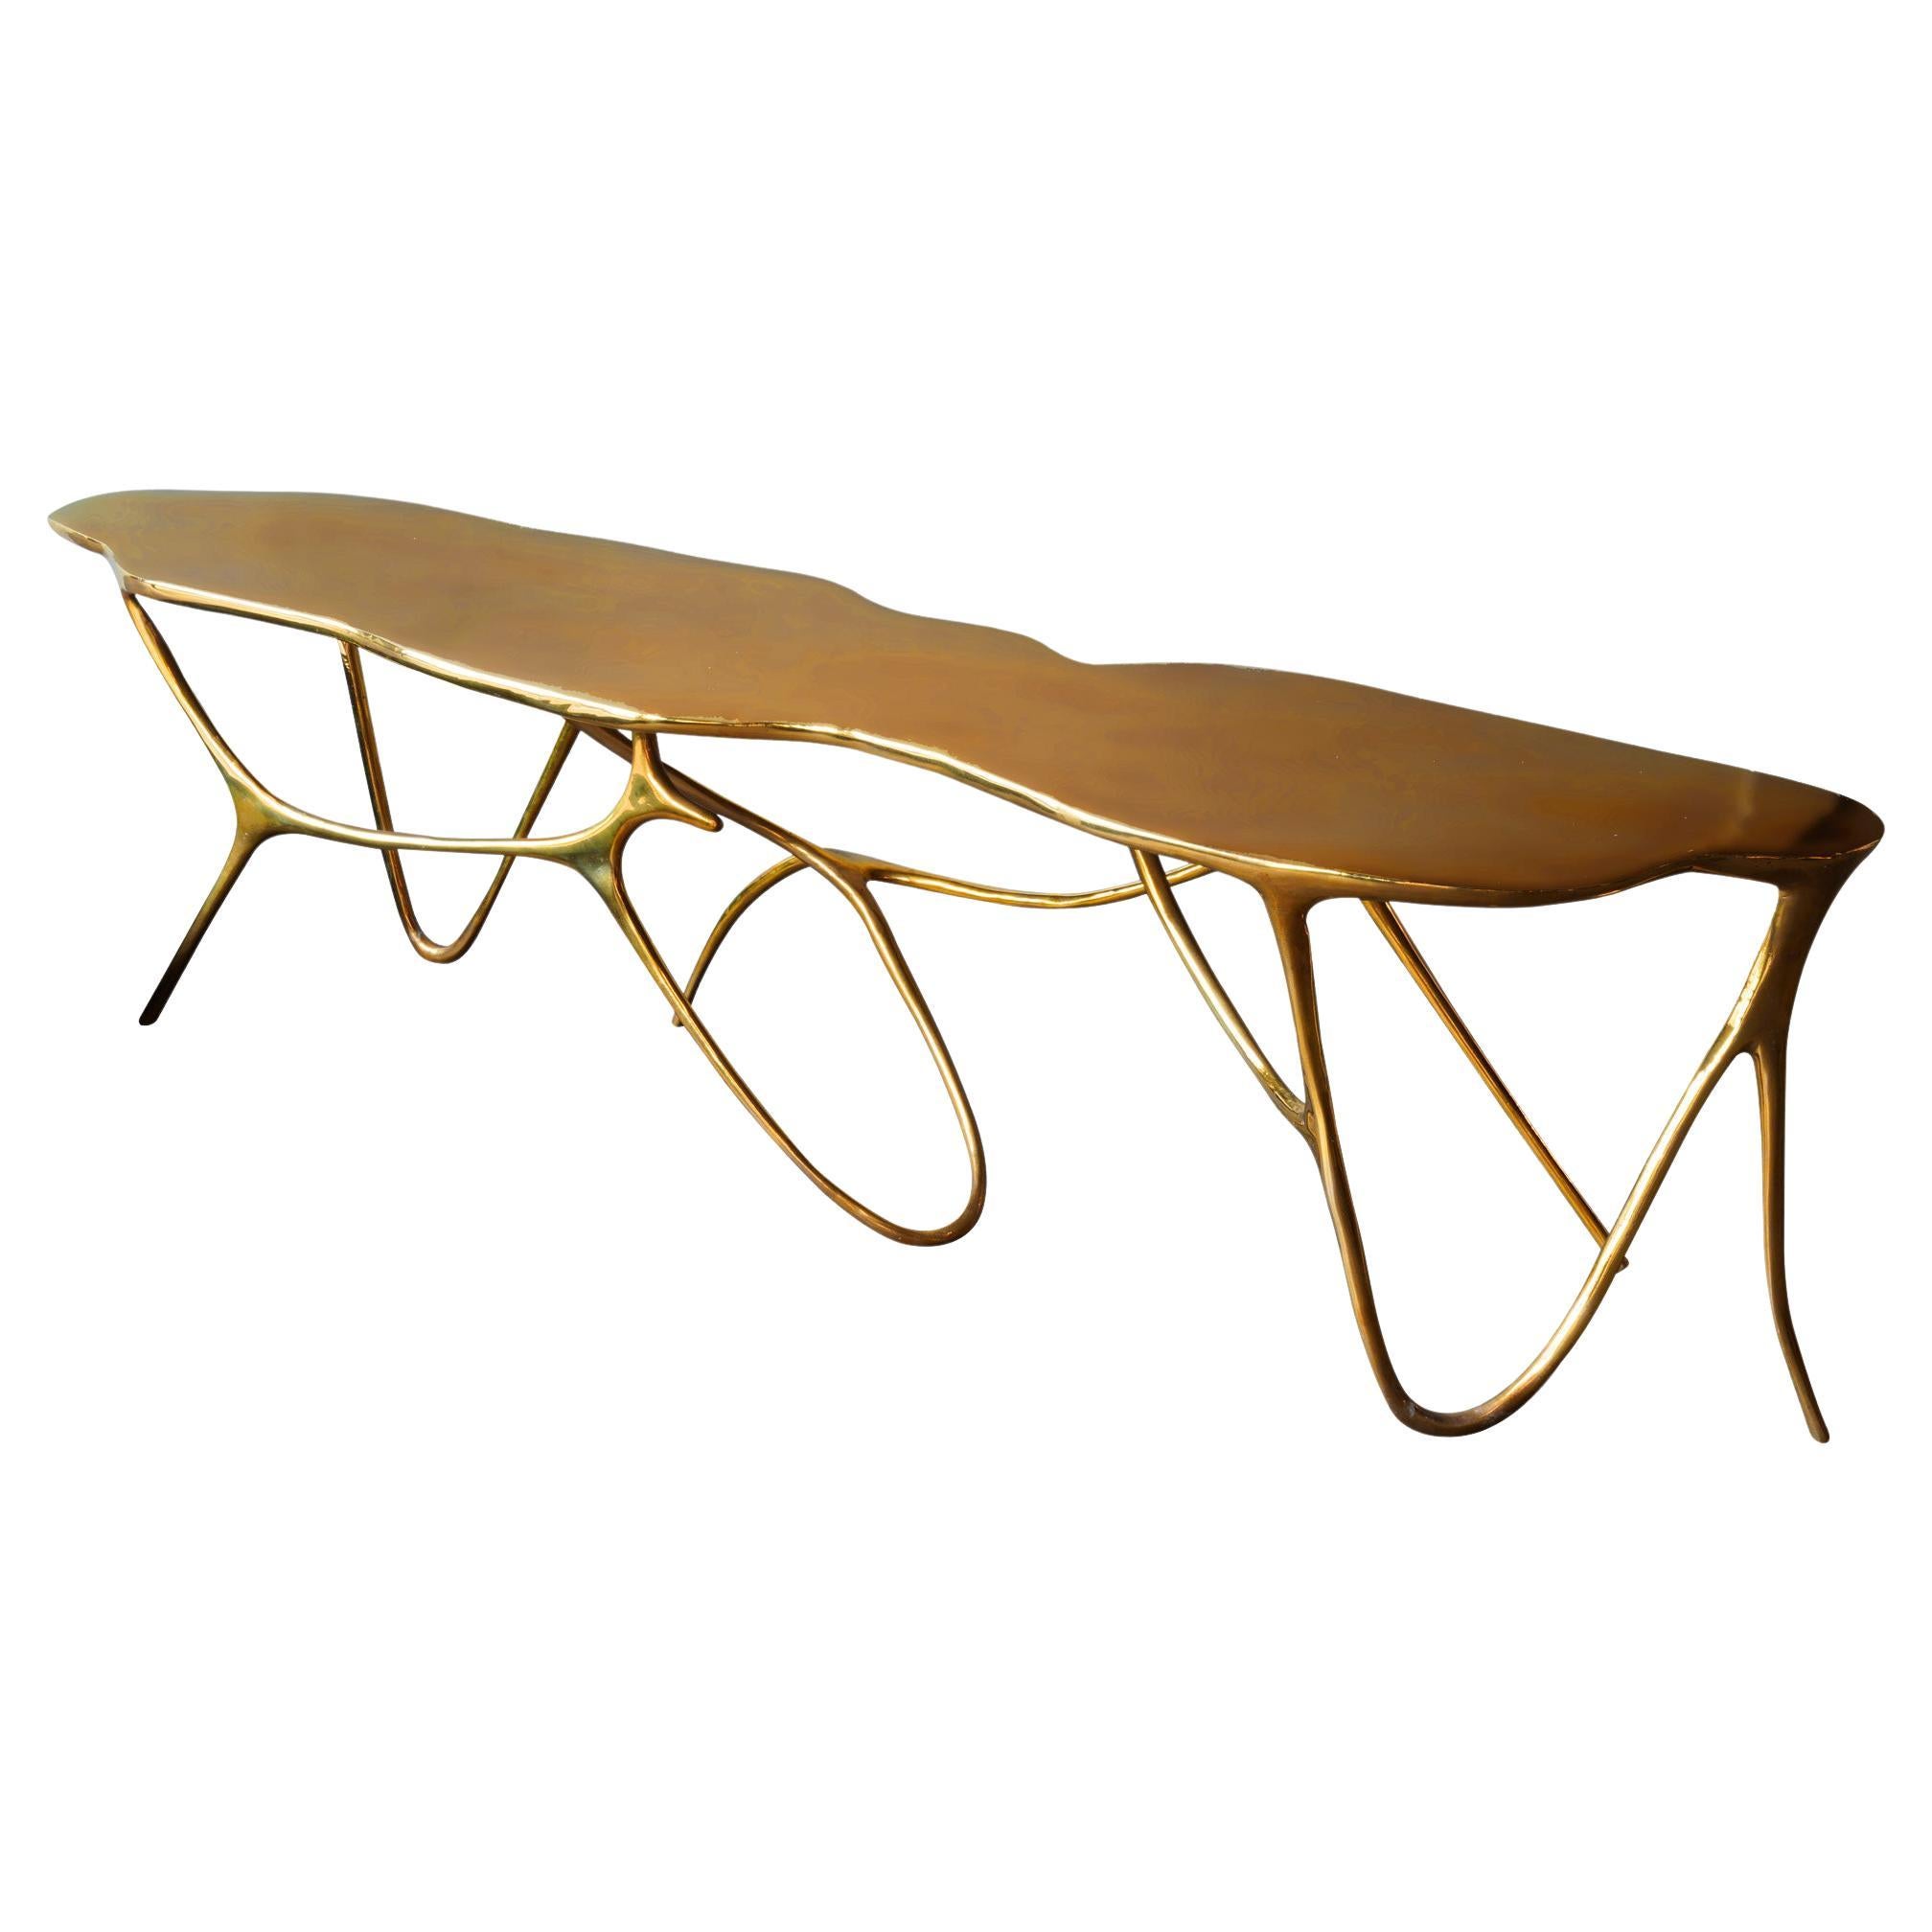 Script Bronze Table or Bench